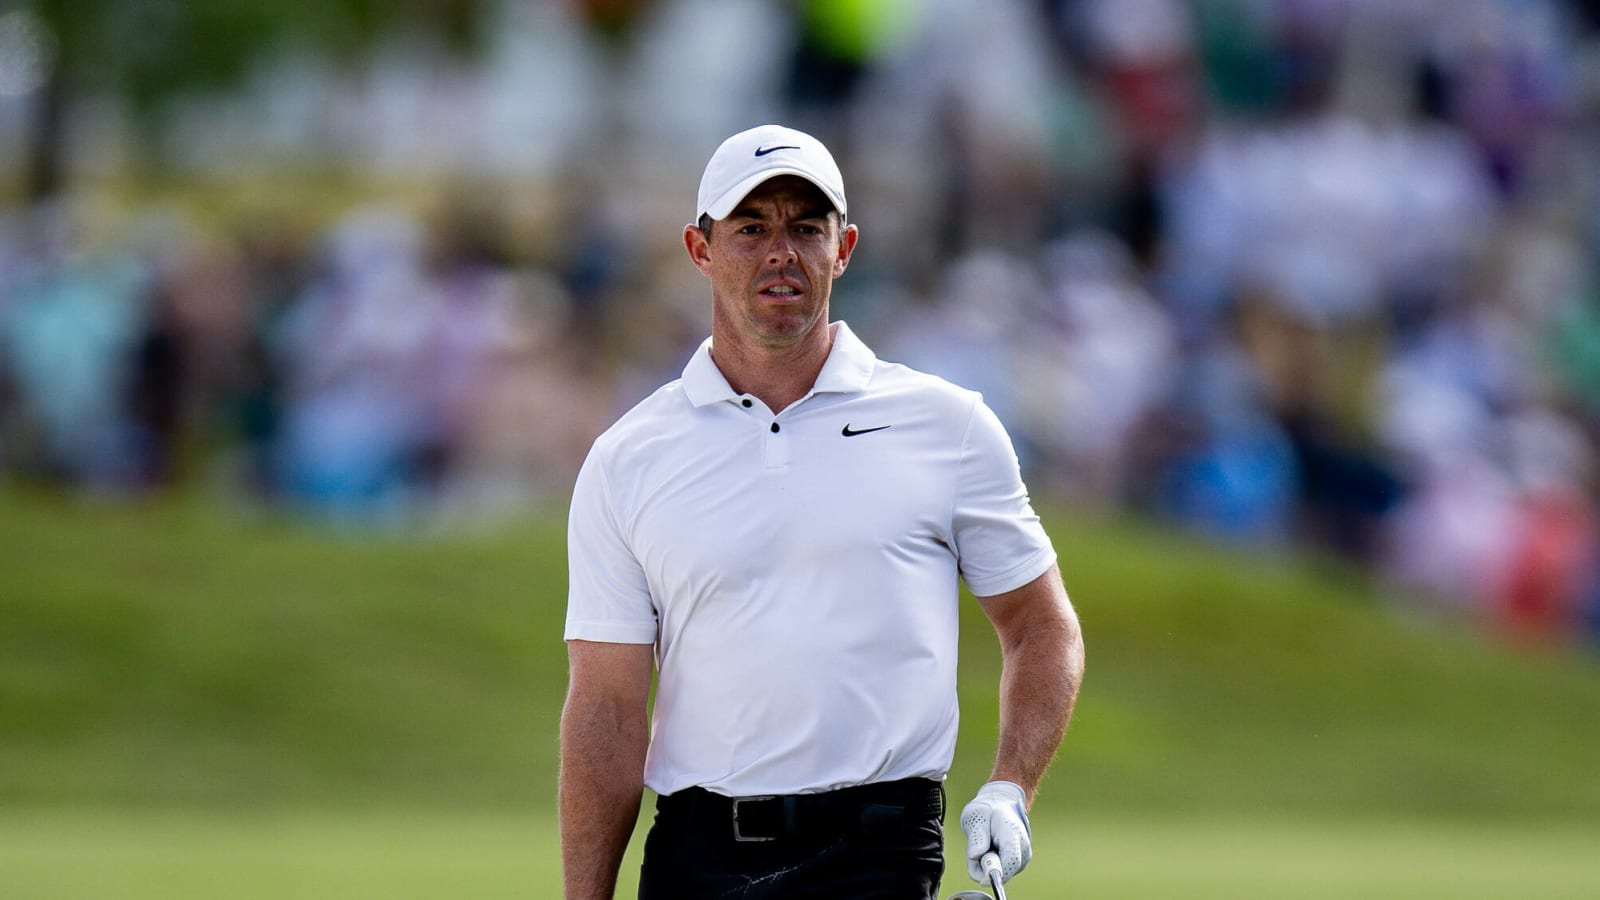 Rory McIlroy’s softened stance towards LIV Golf reportedly 'soured' friendship with Tiger Woods